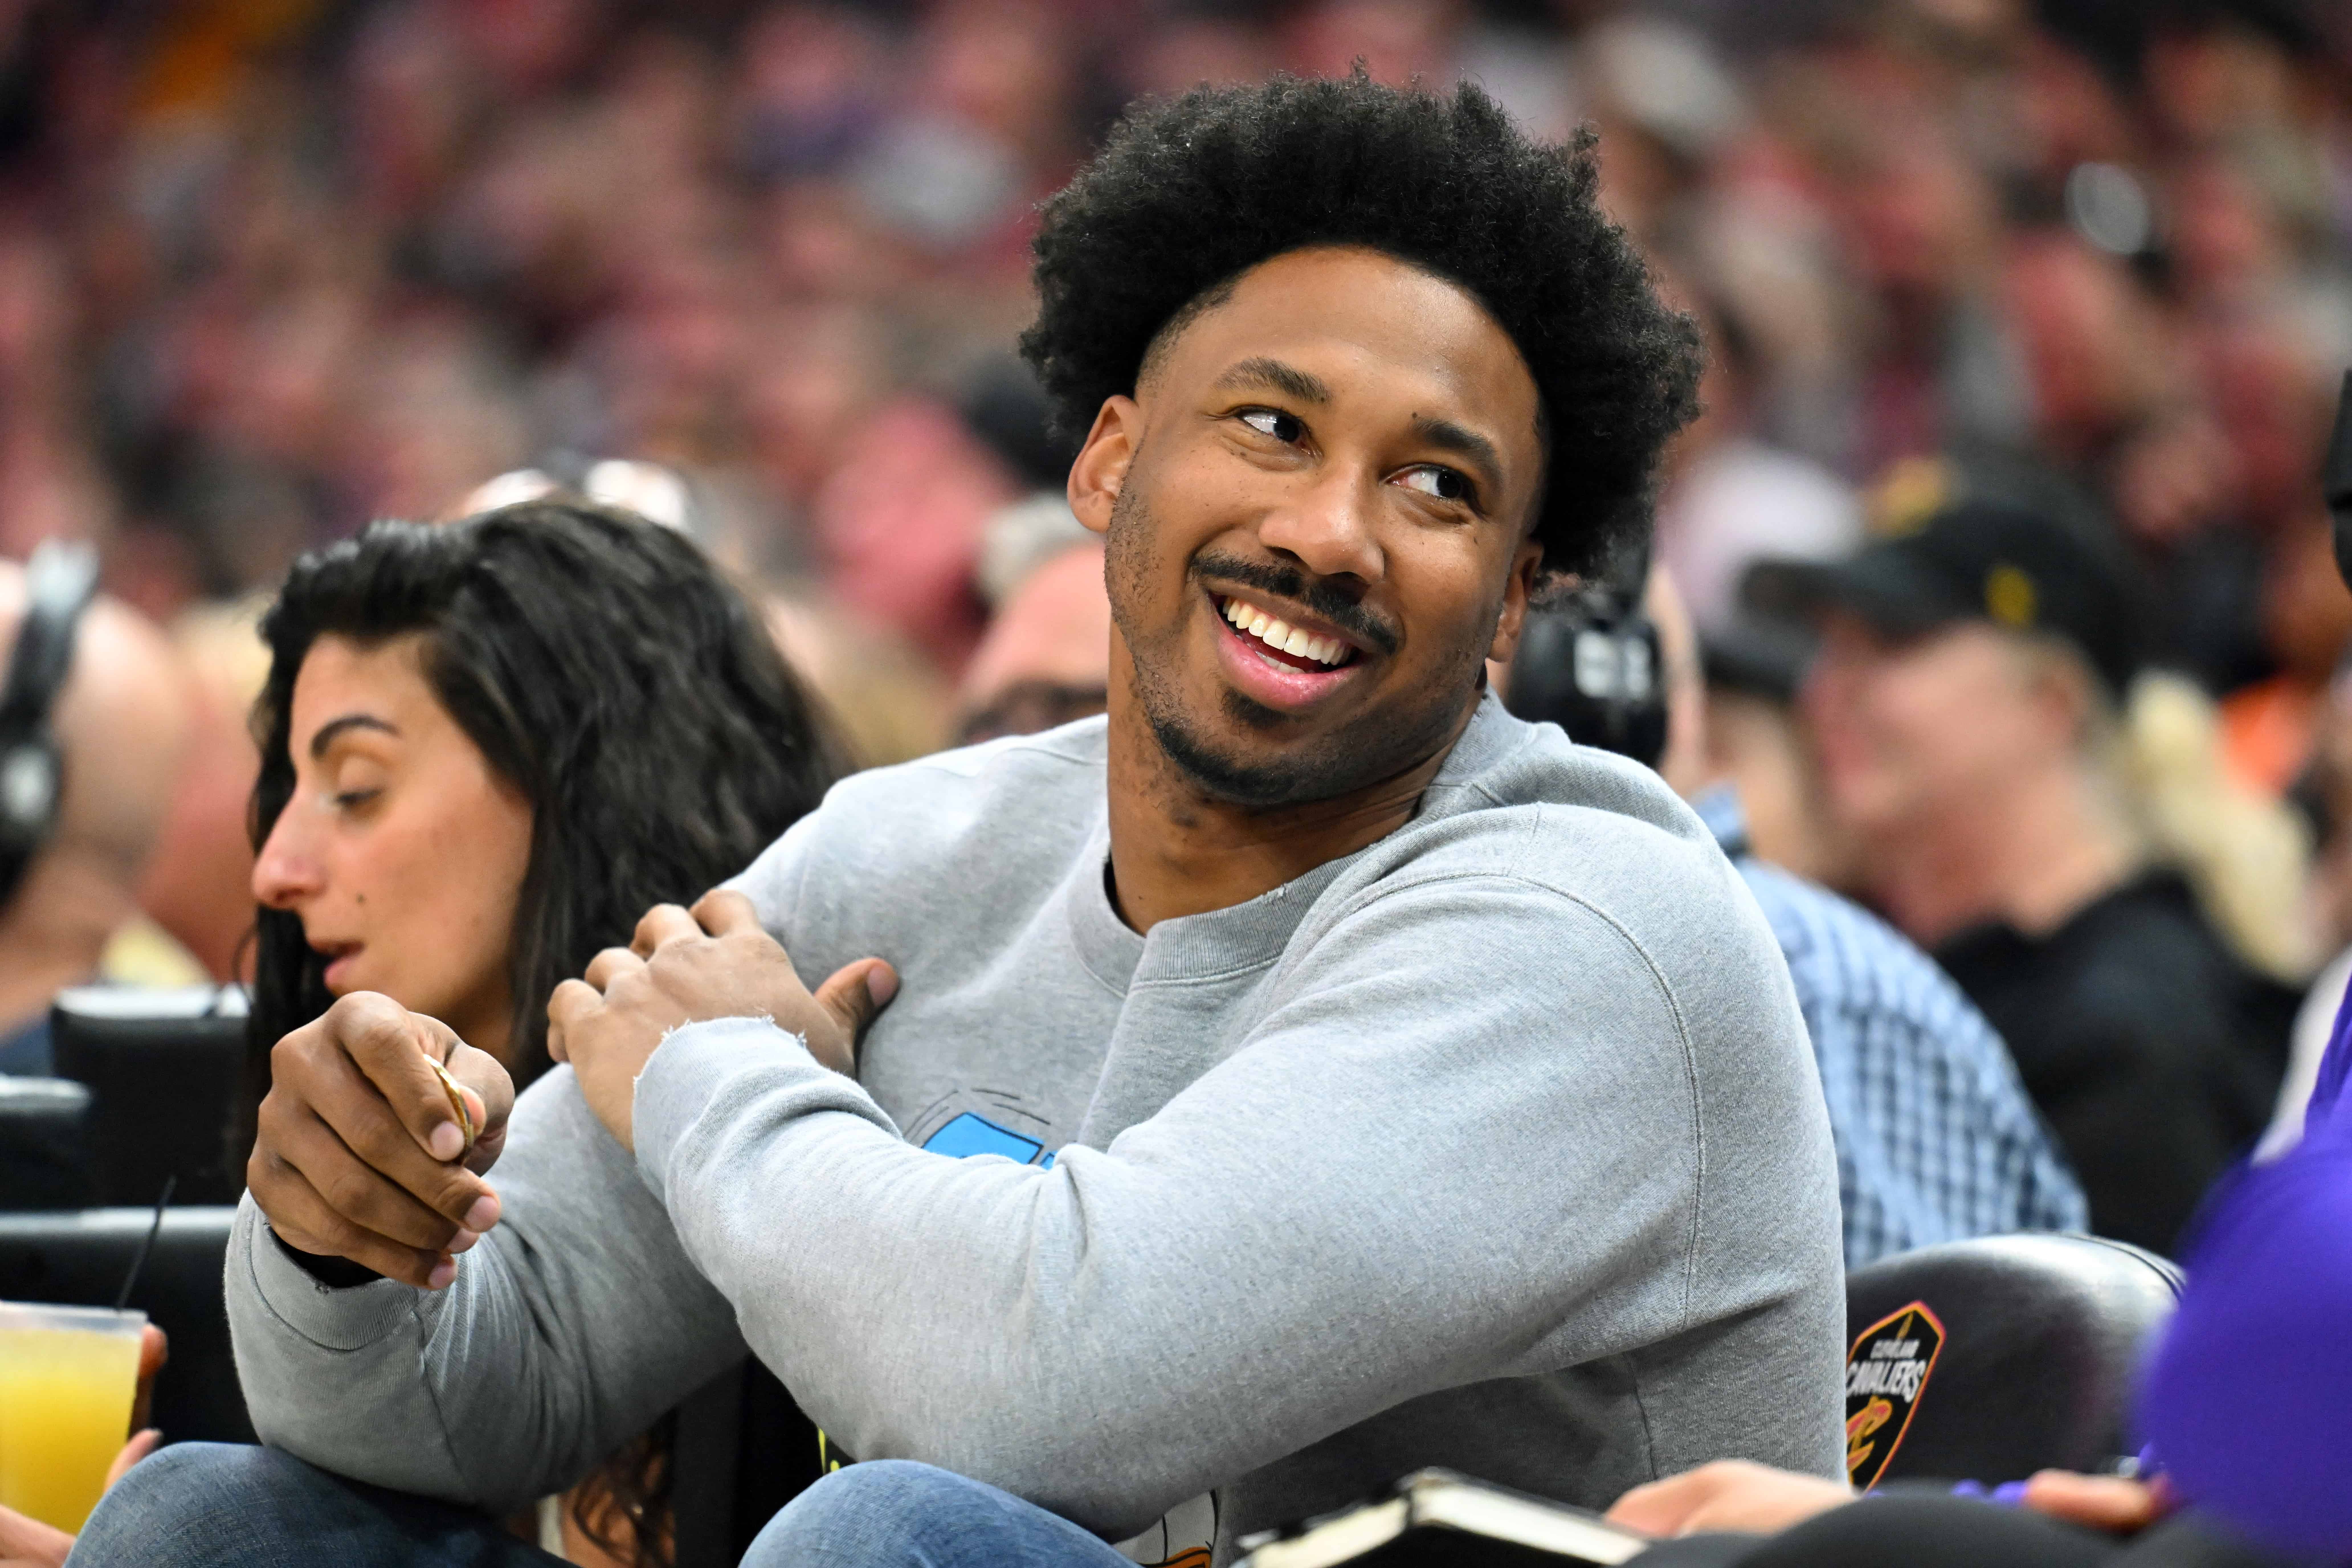 Cleveland Browns defensive end Myles Garrett talks to a fan during the second quarter of the game between the Cleveland Cavaliers and the Los Angeles Lakers at Rocket Mortgage Fieldhouse on March 21, 2022 in Cleveland, Ohio. NOTE TO USER: User expressly acknowledges and agrees that, by downloading and/or using this photograph, user is consenting to the terms and conditions of the Getty Images License Agreement. 